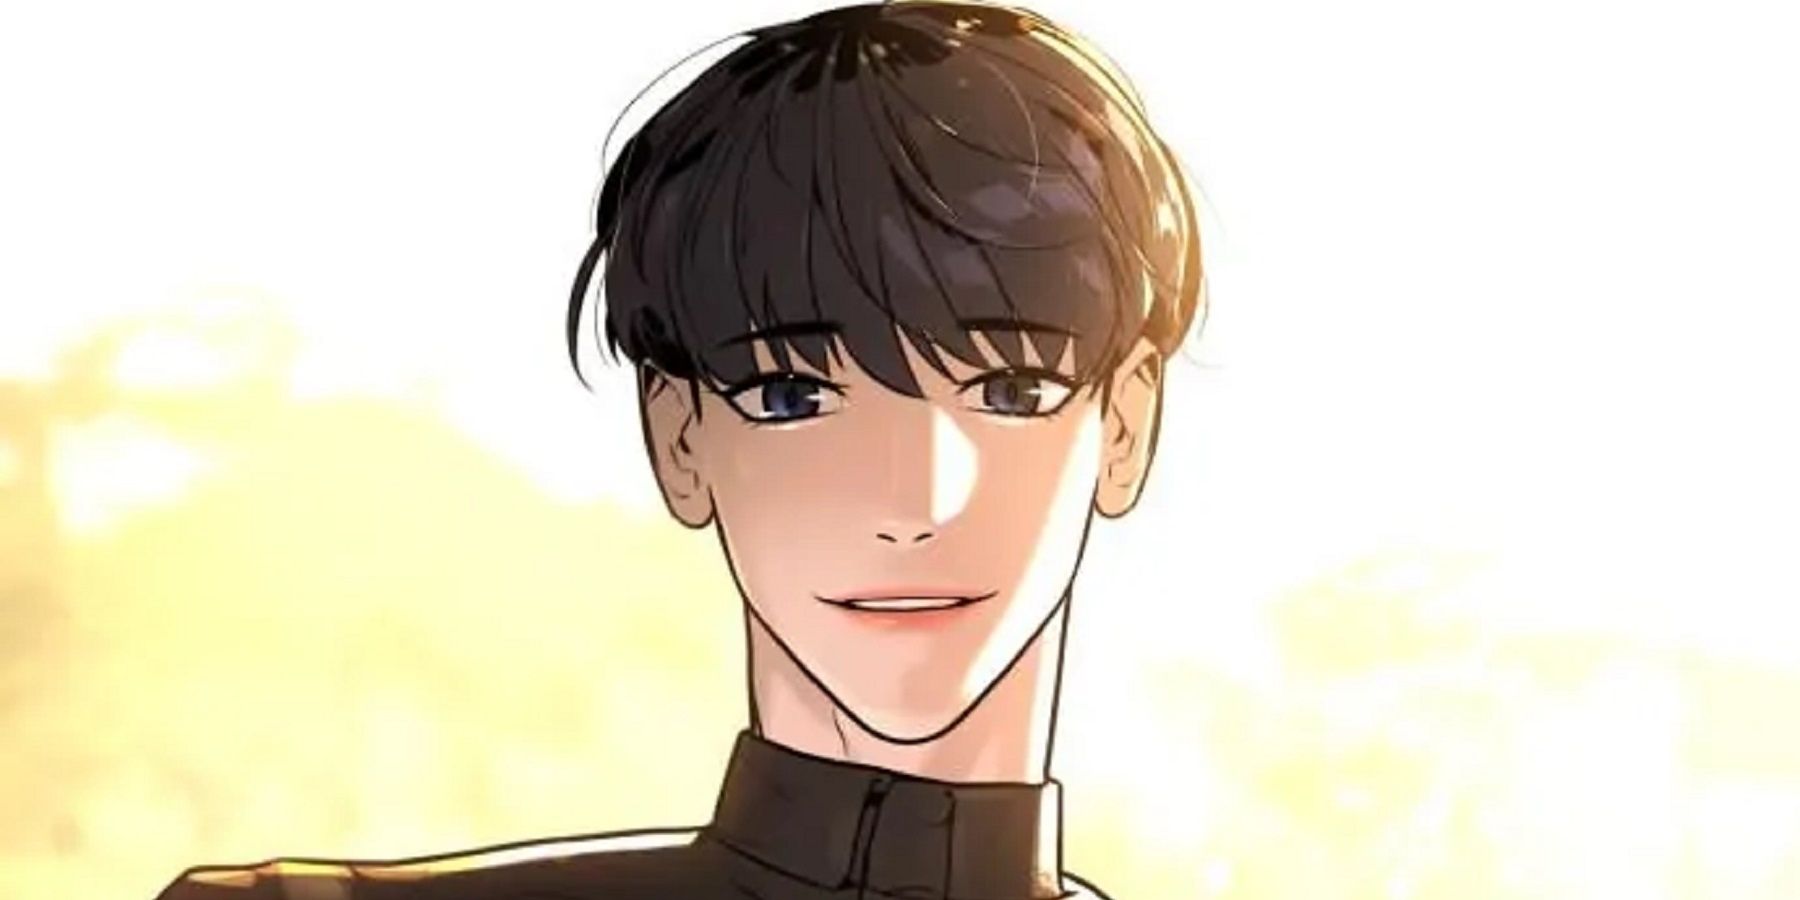 Yohan as a priest smiling kindly